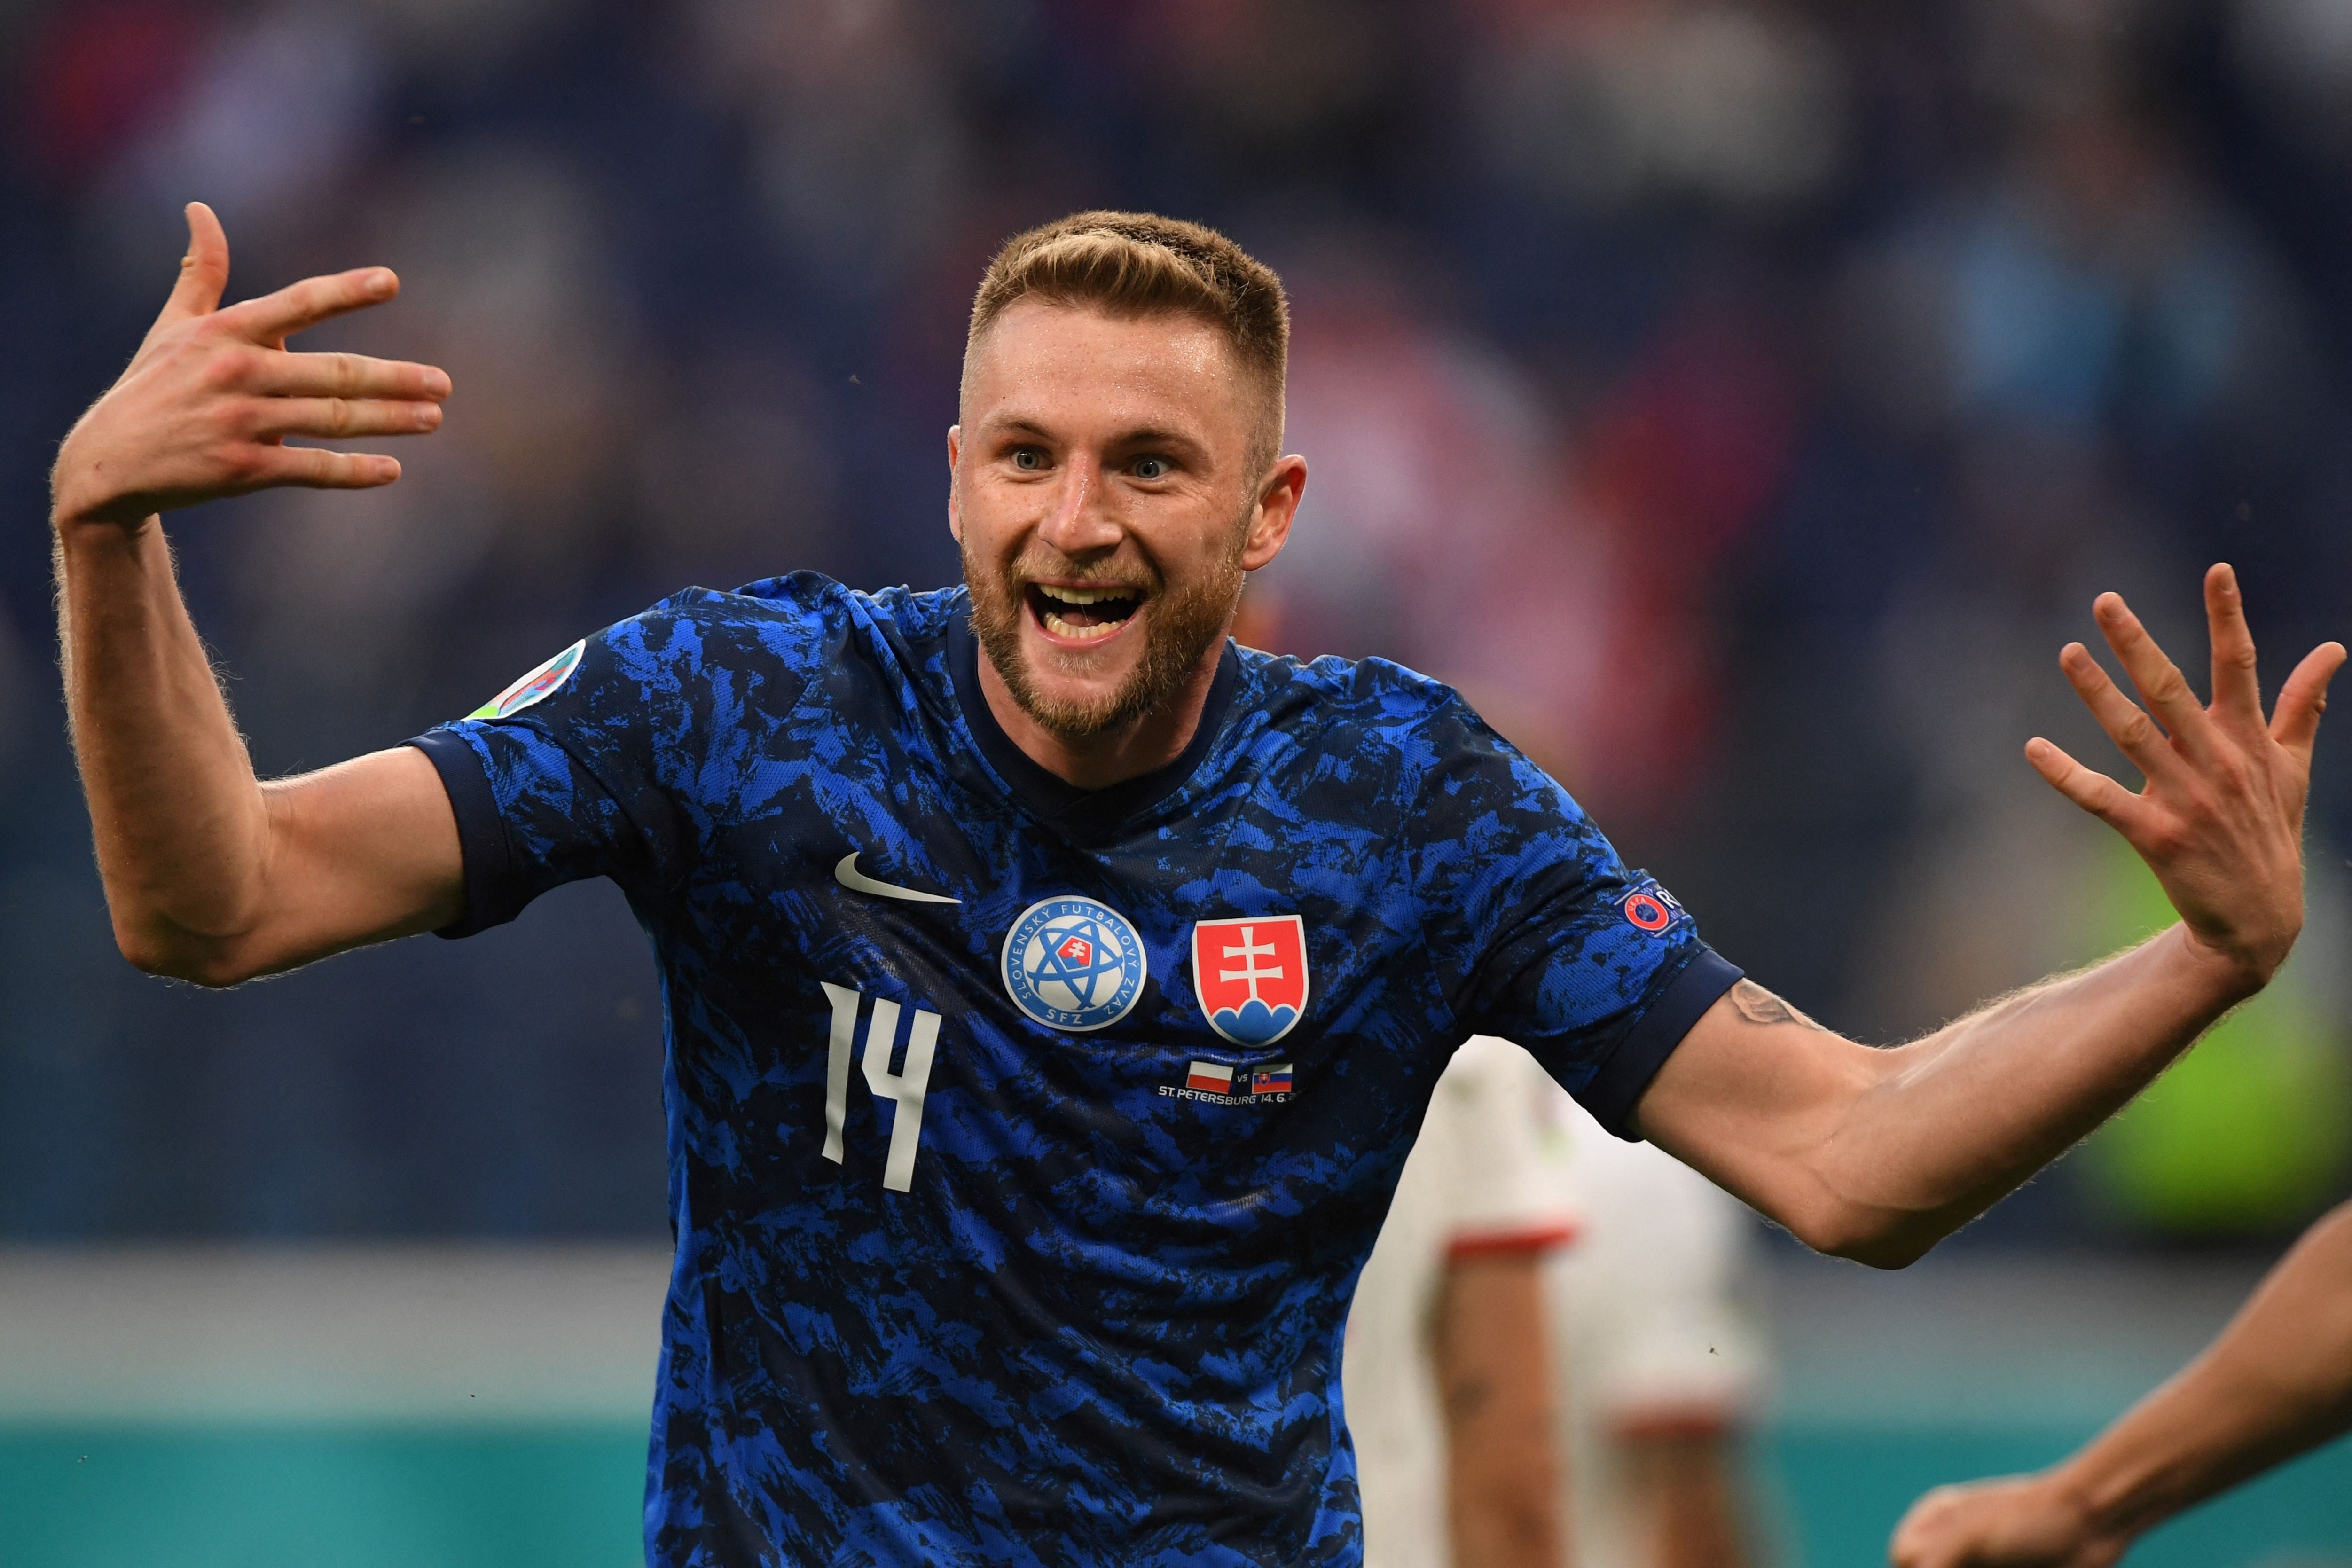 Captain of the team, Milan Skriniar sets the example for Slovakia and has high hopes for the tournament.